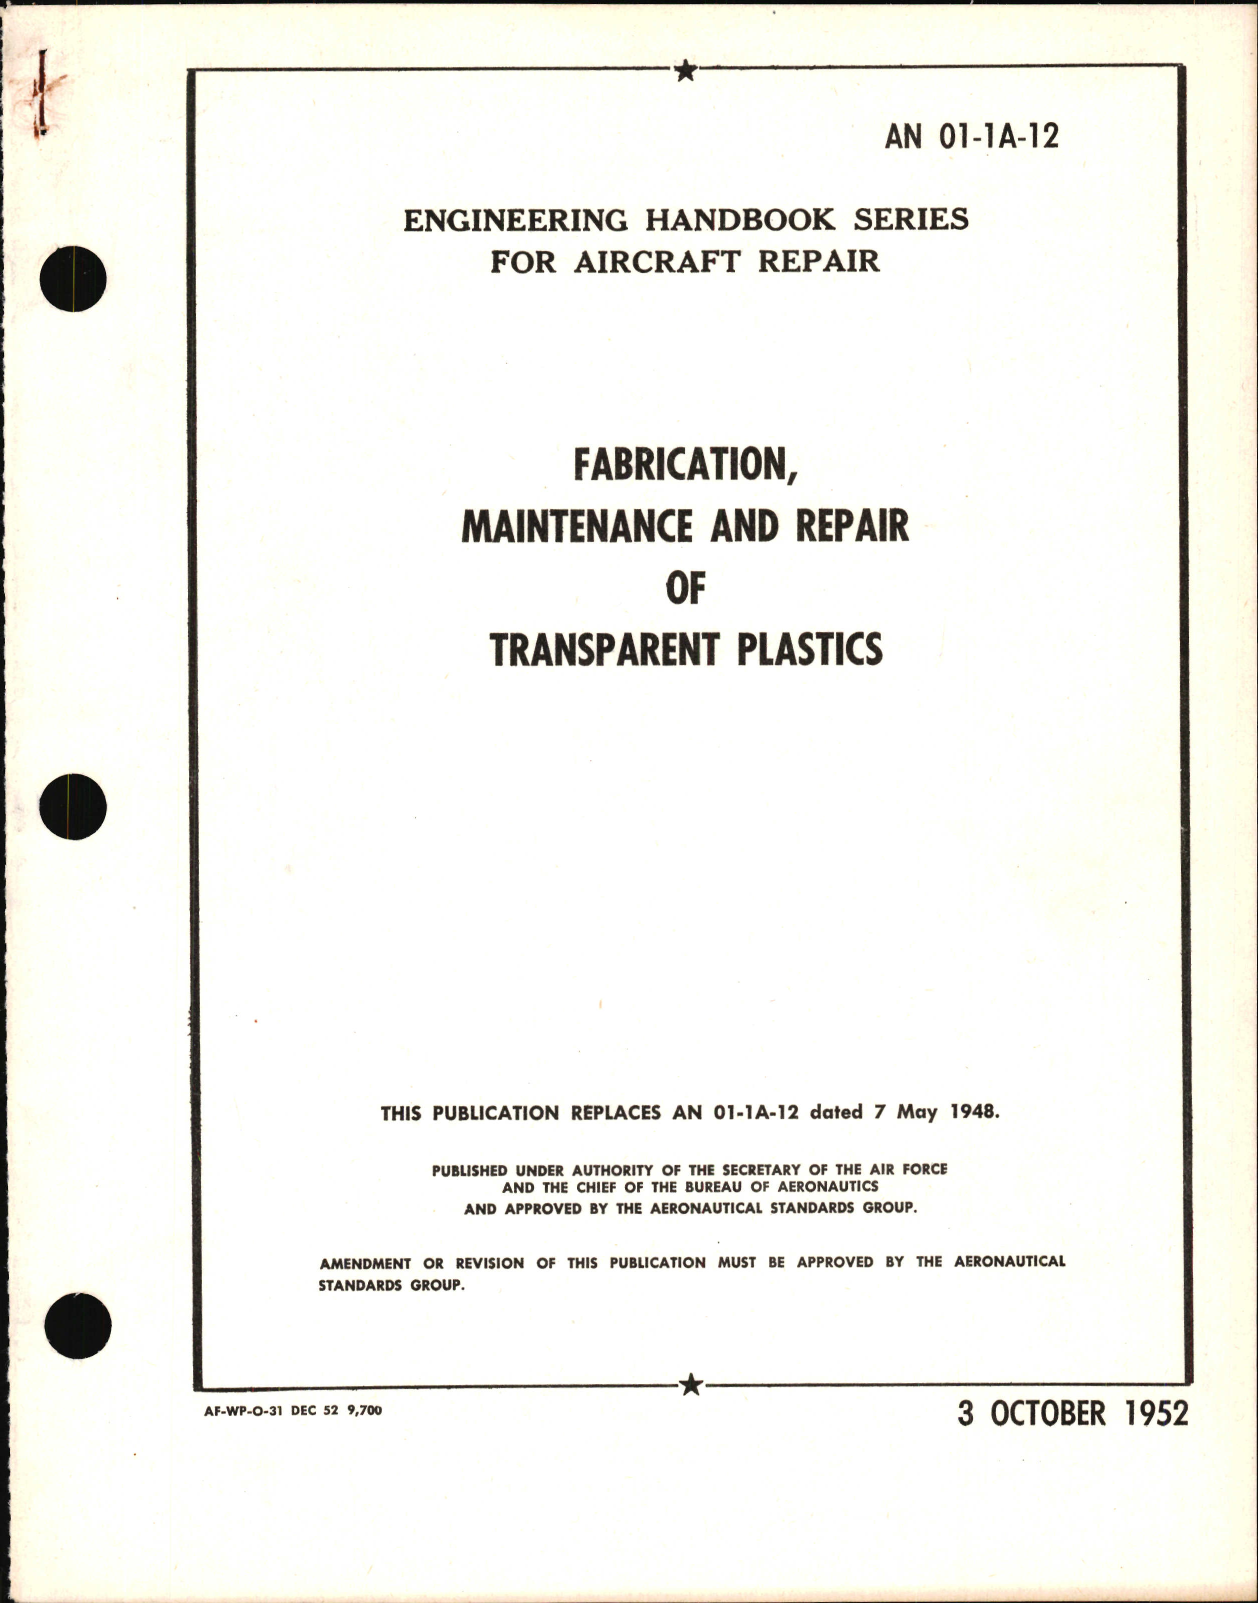 Sample page 1 from AirCorps Library document: Fabrication, Maintenance, and Repair of Transparent Plastics